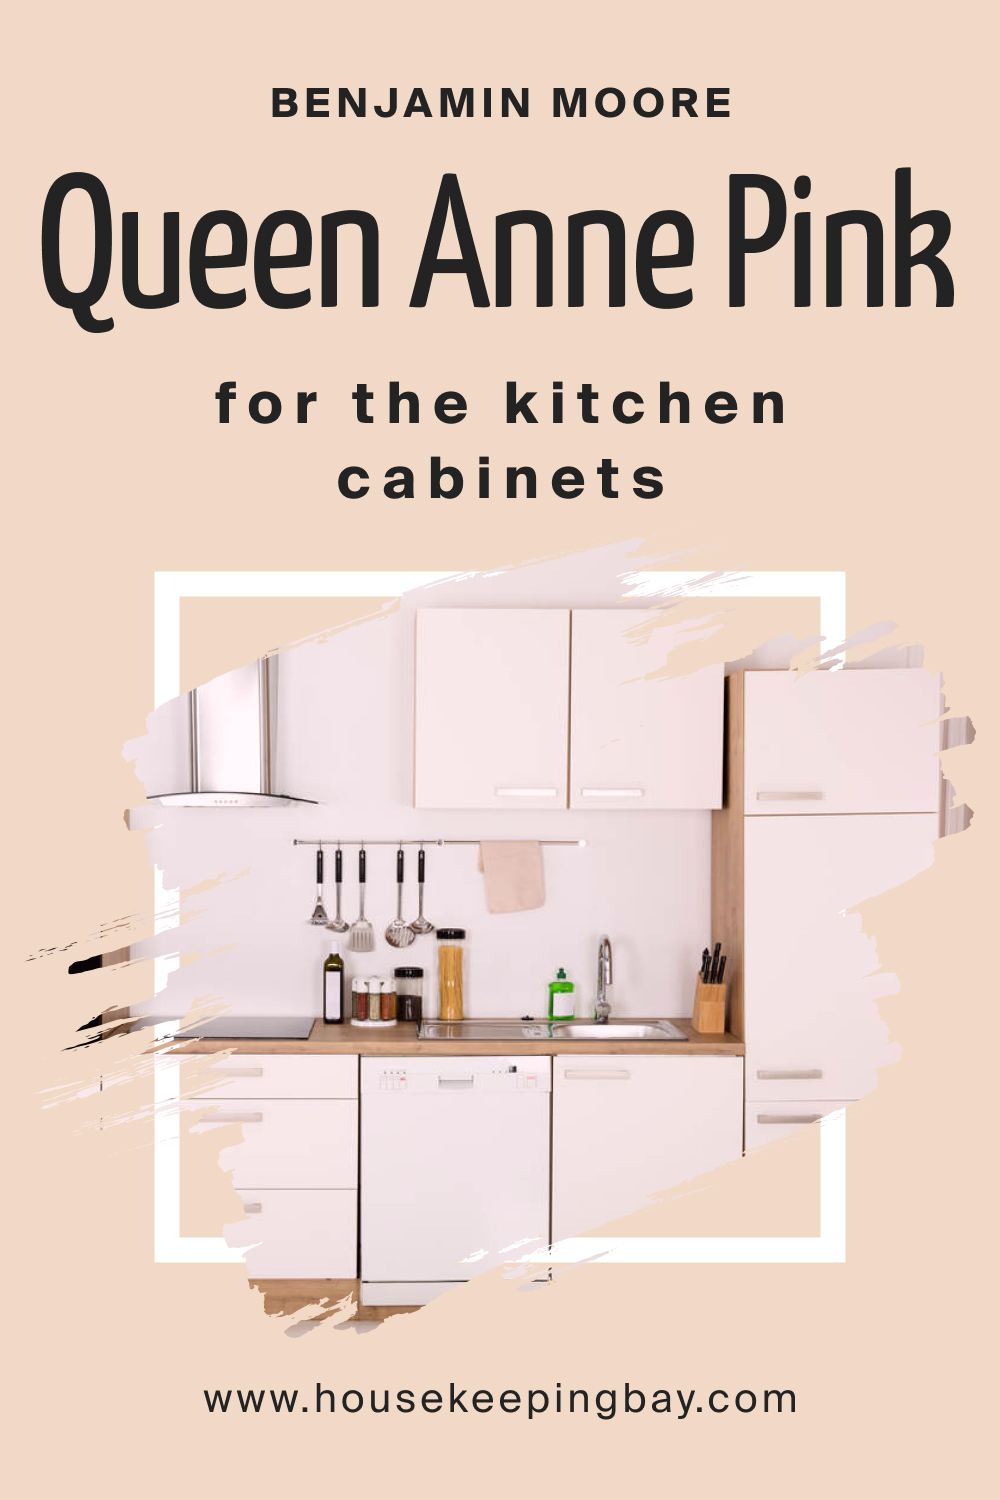 How to Use Queen Anne Pink HC-60 on the Kitchen Cabinets?